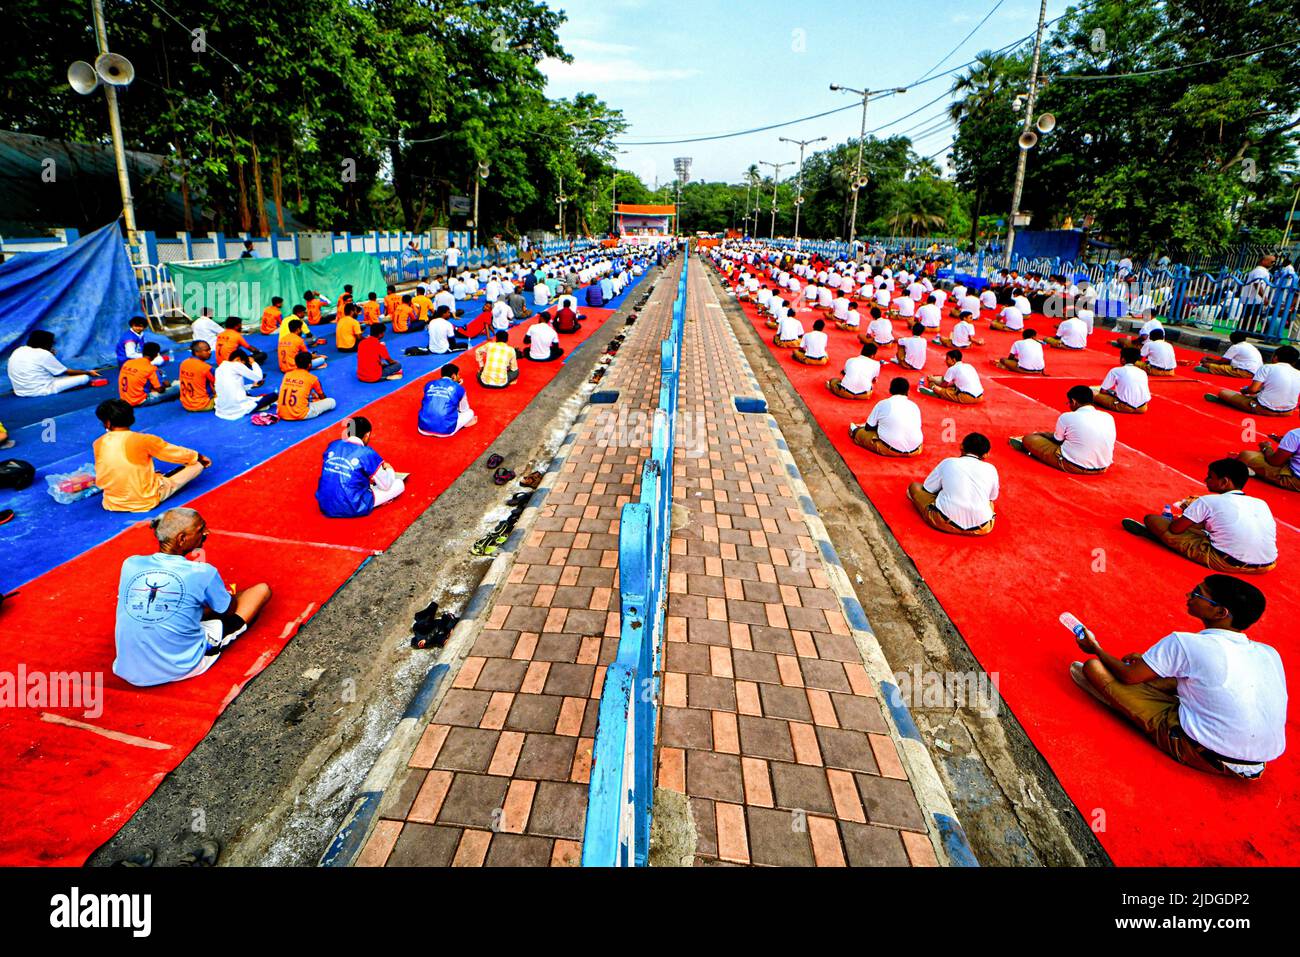 Kolkata, India. 21st June, 2022. People seen practicing Padmasama (A form of Yoga) during the International Yoga Day in Kolkata organized by Kreeda bharati . Yoga is a Physical and Spiritual practice originated from India during the Ancient ages and its now recognized by United Nations. International YOGA DAY has been celebrated annually on June 21 since 2015, following its inception in the United Nations General Assembly in 2014. (Photo by Avishek Das/SOPA Images/Sipa USA) Credit: Sipa USA/Alamy Live News Stock Photo